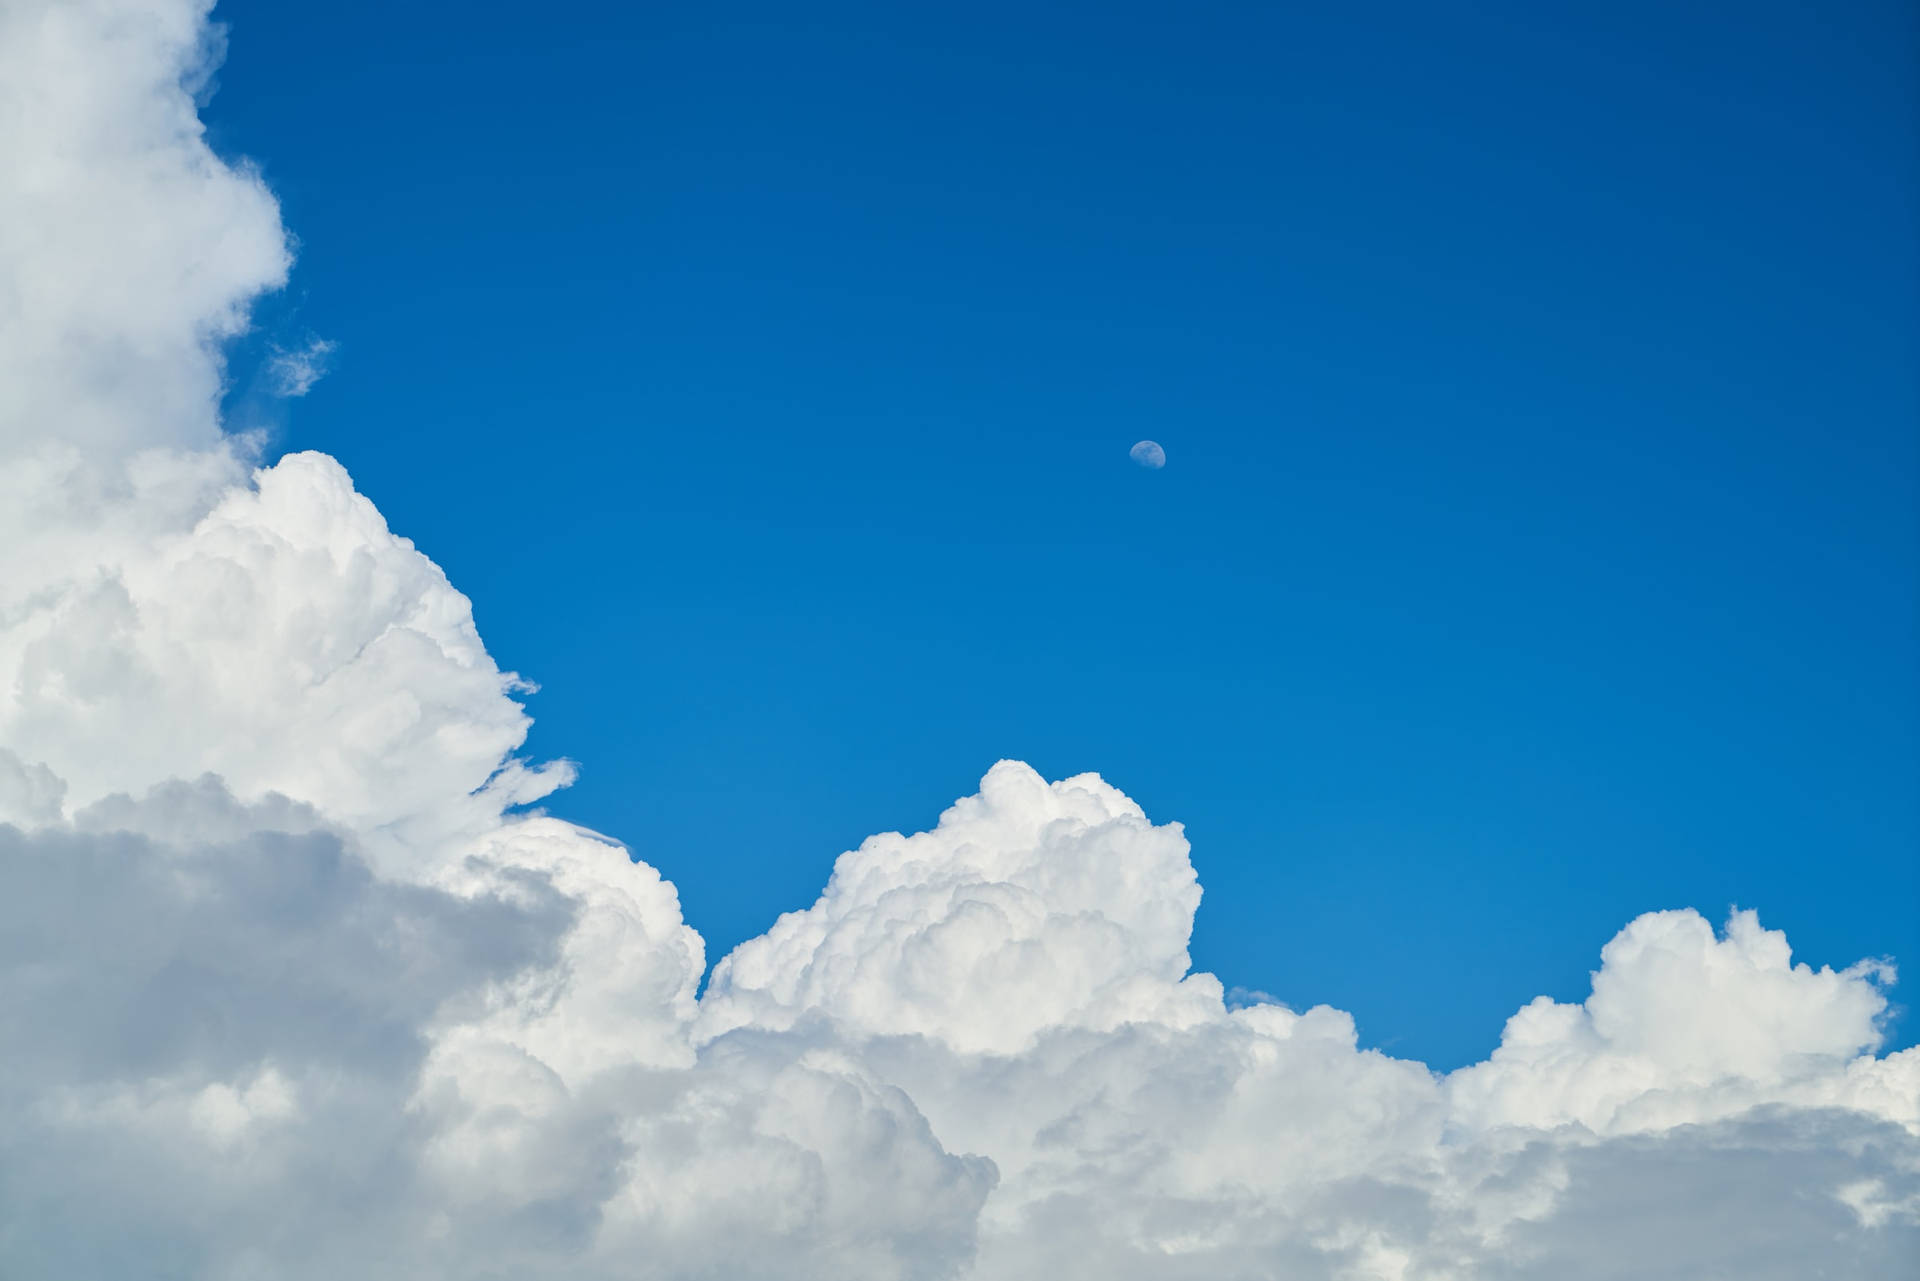 Afternoon Blue Cloudy Sky With Moon Wallpaper